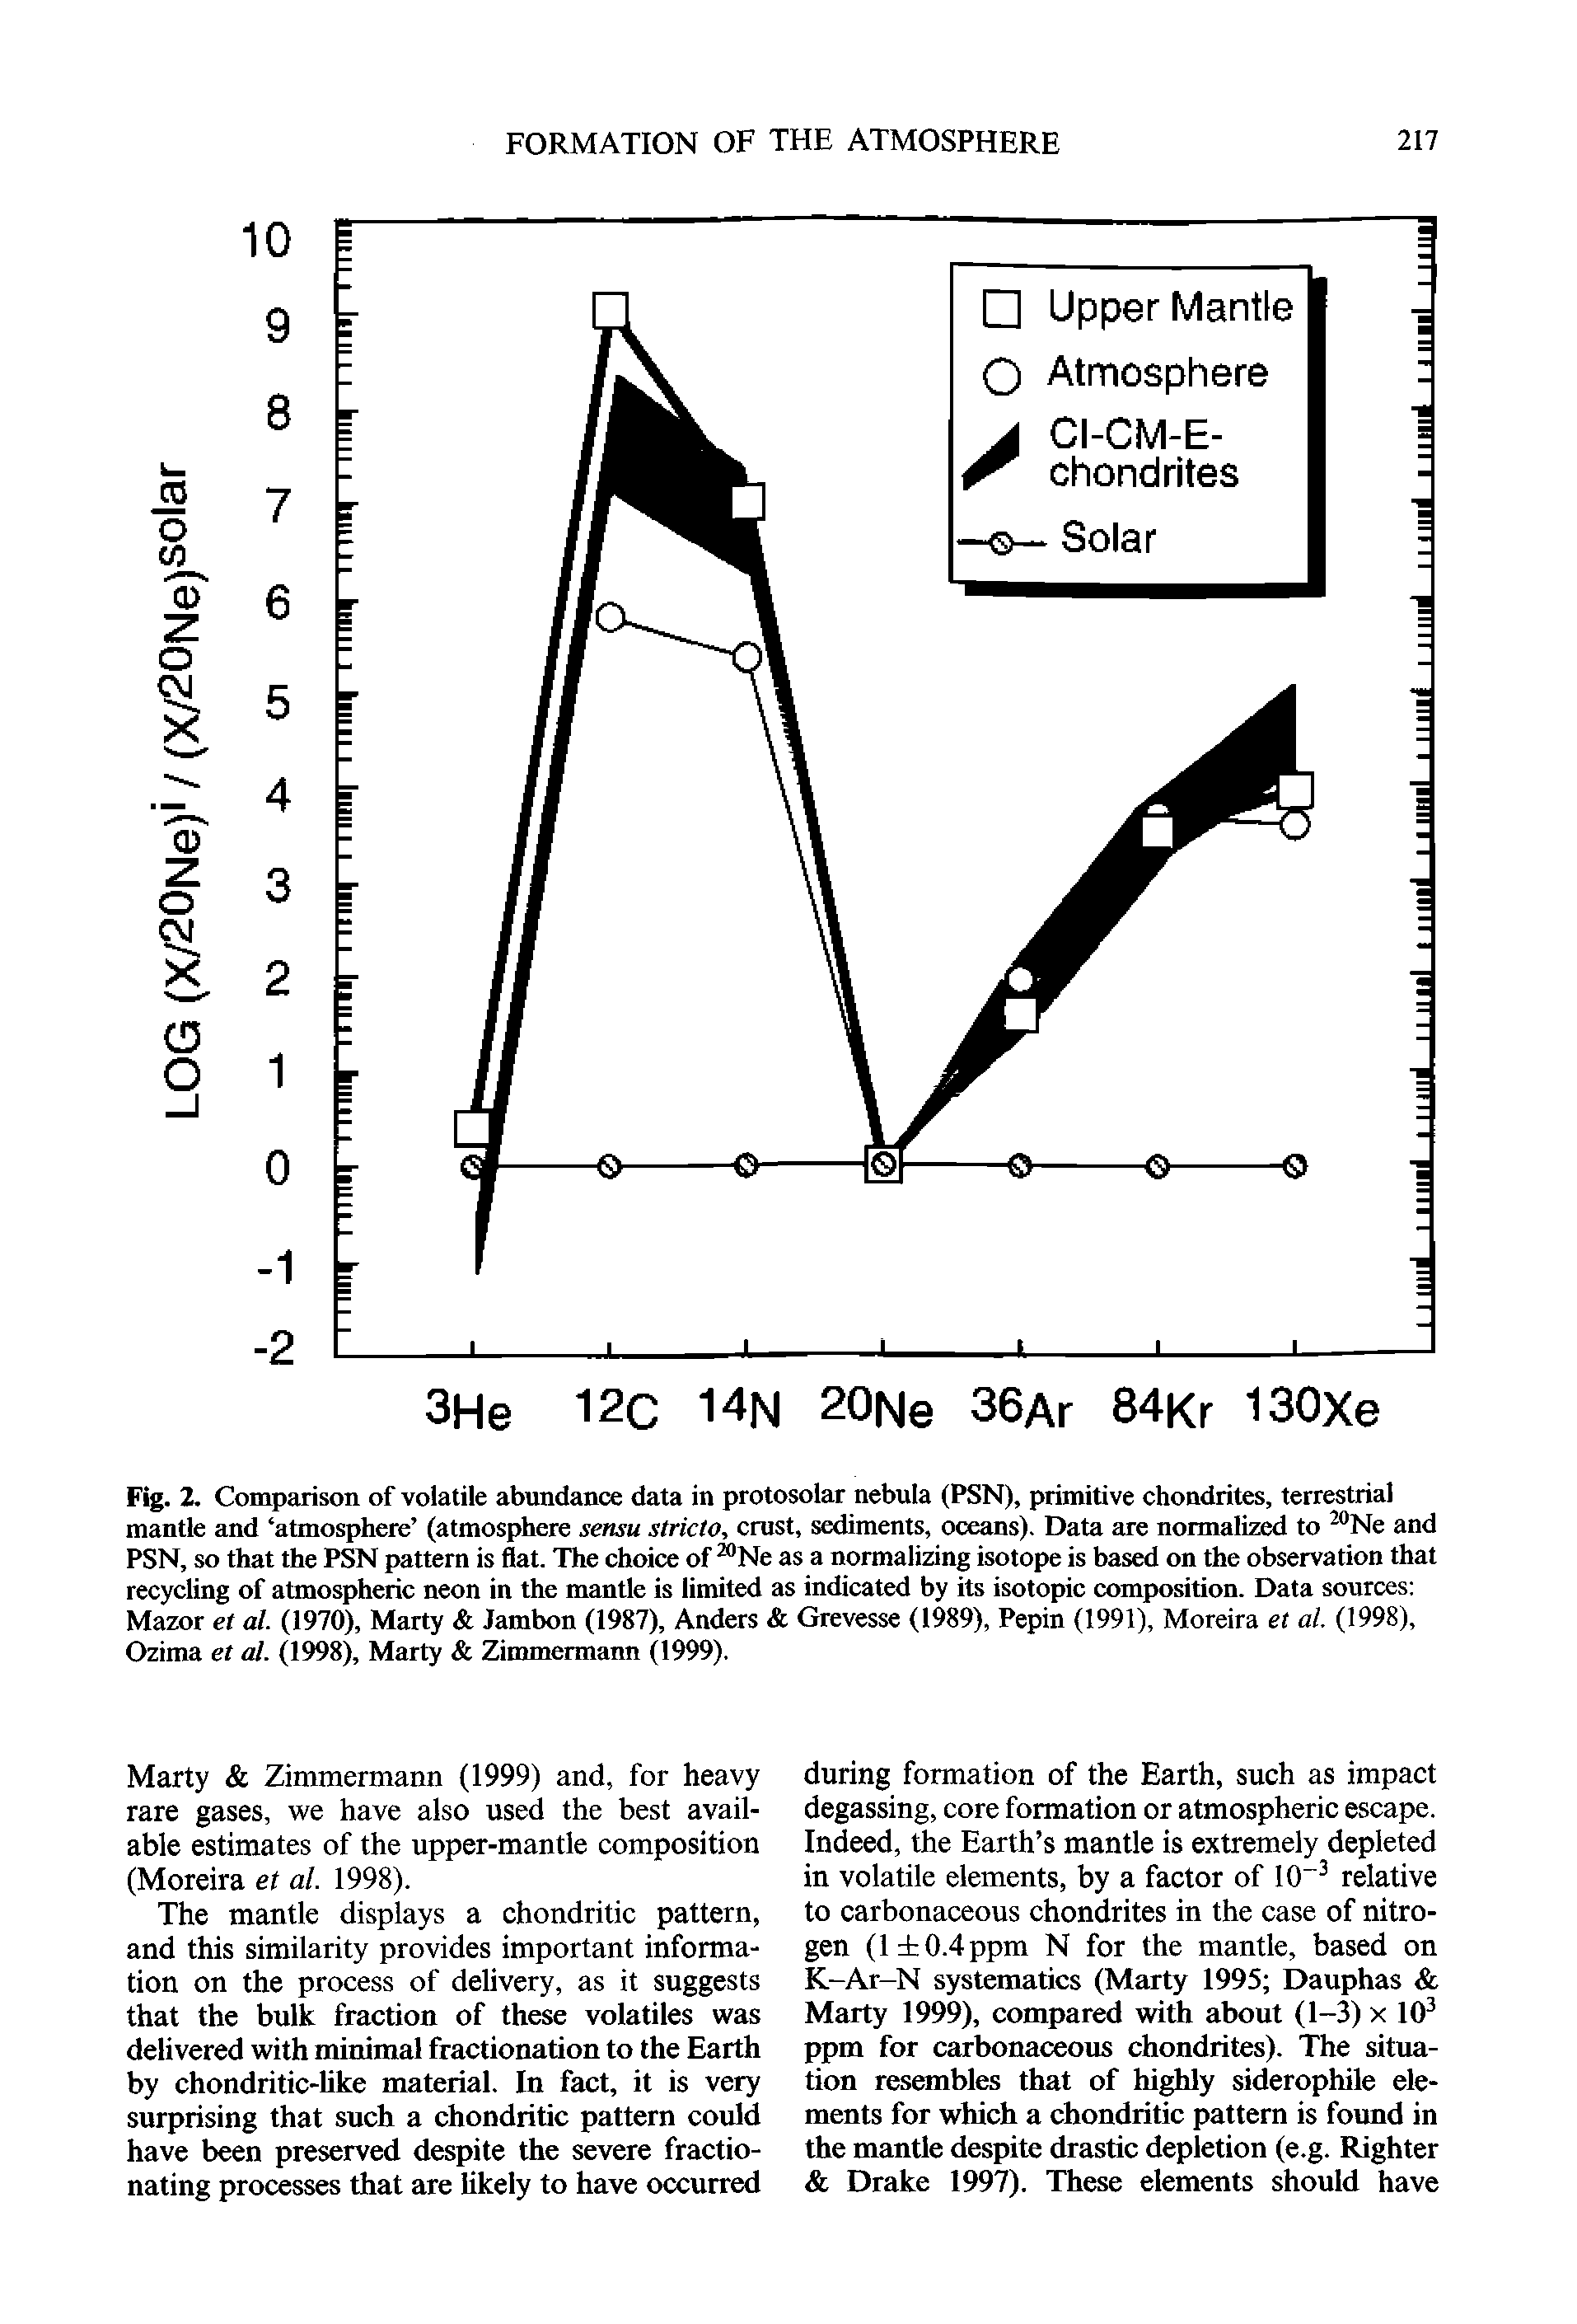 Fig. 2. Comparison of volatile abundance data in protosolar nebula (PSN), primitive chondrites, terrestrial mantle and atmosphere (atmosphere sensu stricto, crust, sediments, oceans). Data are normalized to Ne and PSN, so that the PSN pattern is flat. The choice of Ne as a normalizing isotope is based on the observation that recycling of atmospheric neon in the mantle is limited as indicated by its isotopic composition. Data sources Mazor et al. (1970), Marty Jambon (1987), Anders Grevesse (1989), Pepin (1991), Moreira et al. (1998), Ozima et al. (1998), Marty Zimmermann (1999).